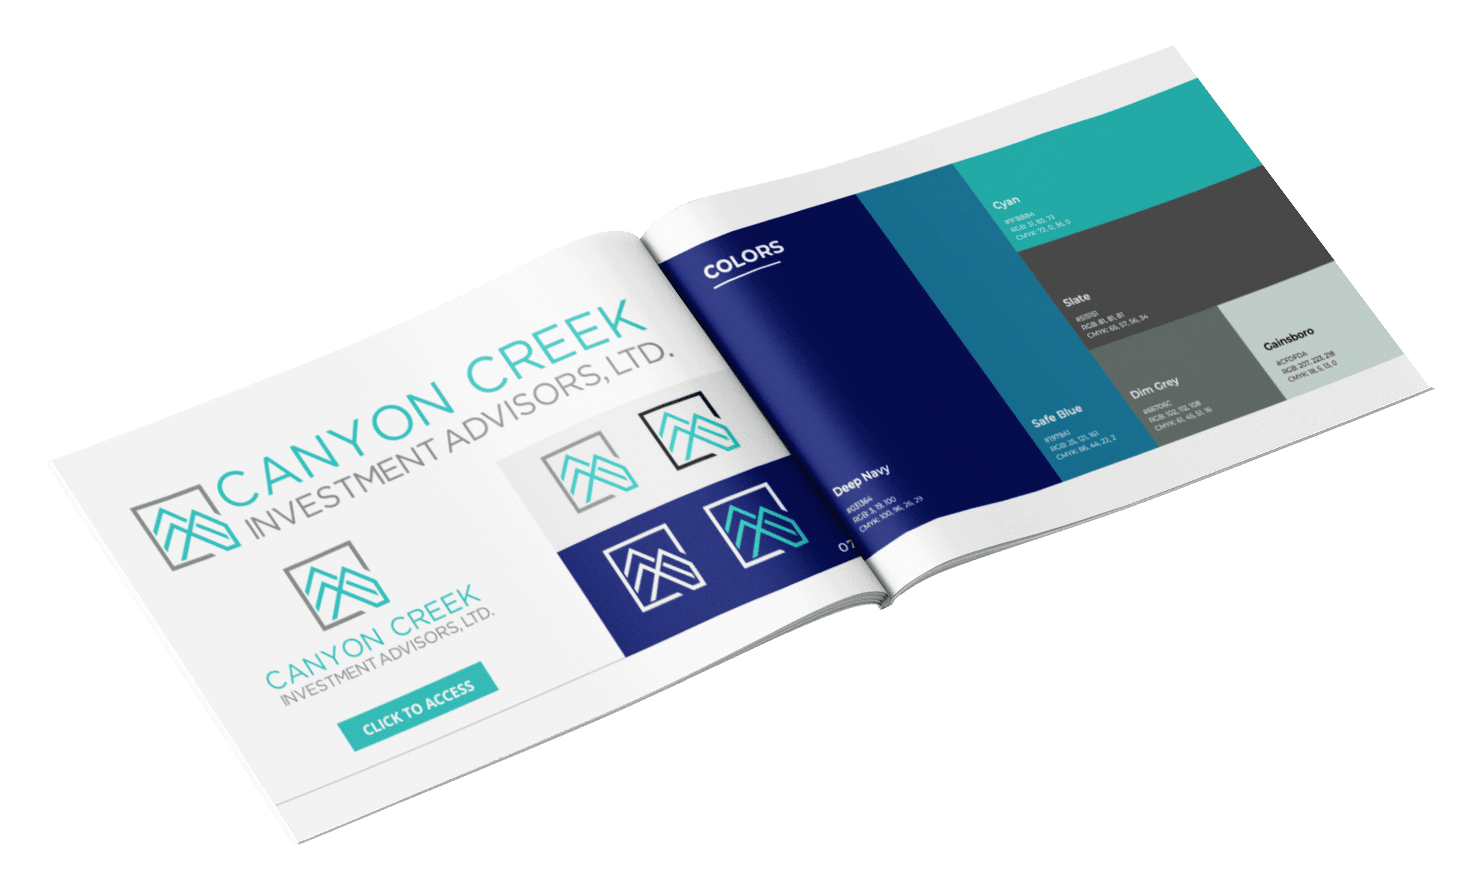 Canyon Creek brand style guide mockup page logos and colors by Big Red Jelly